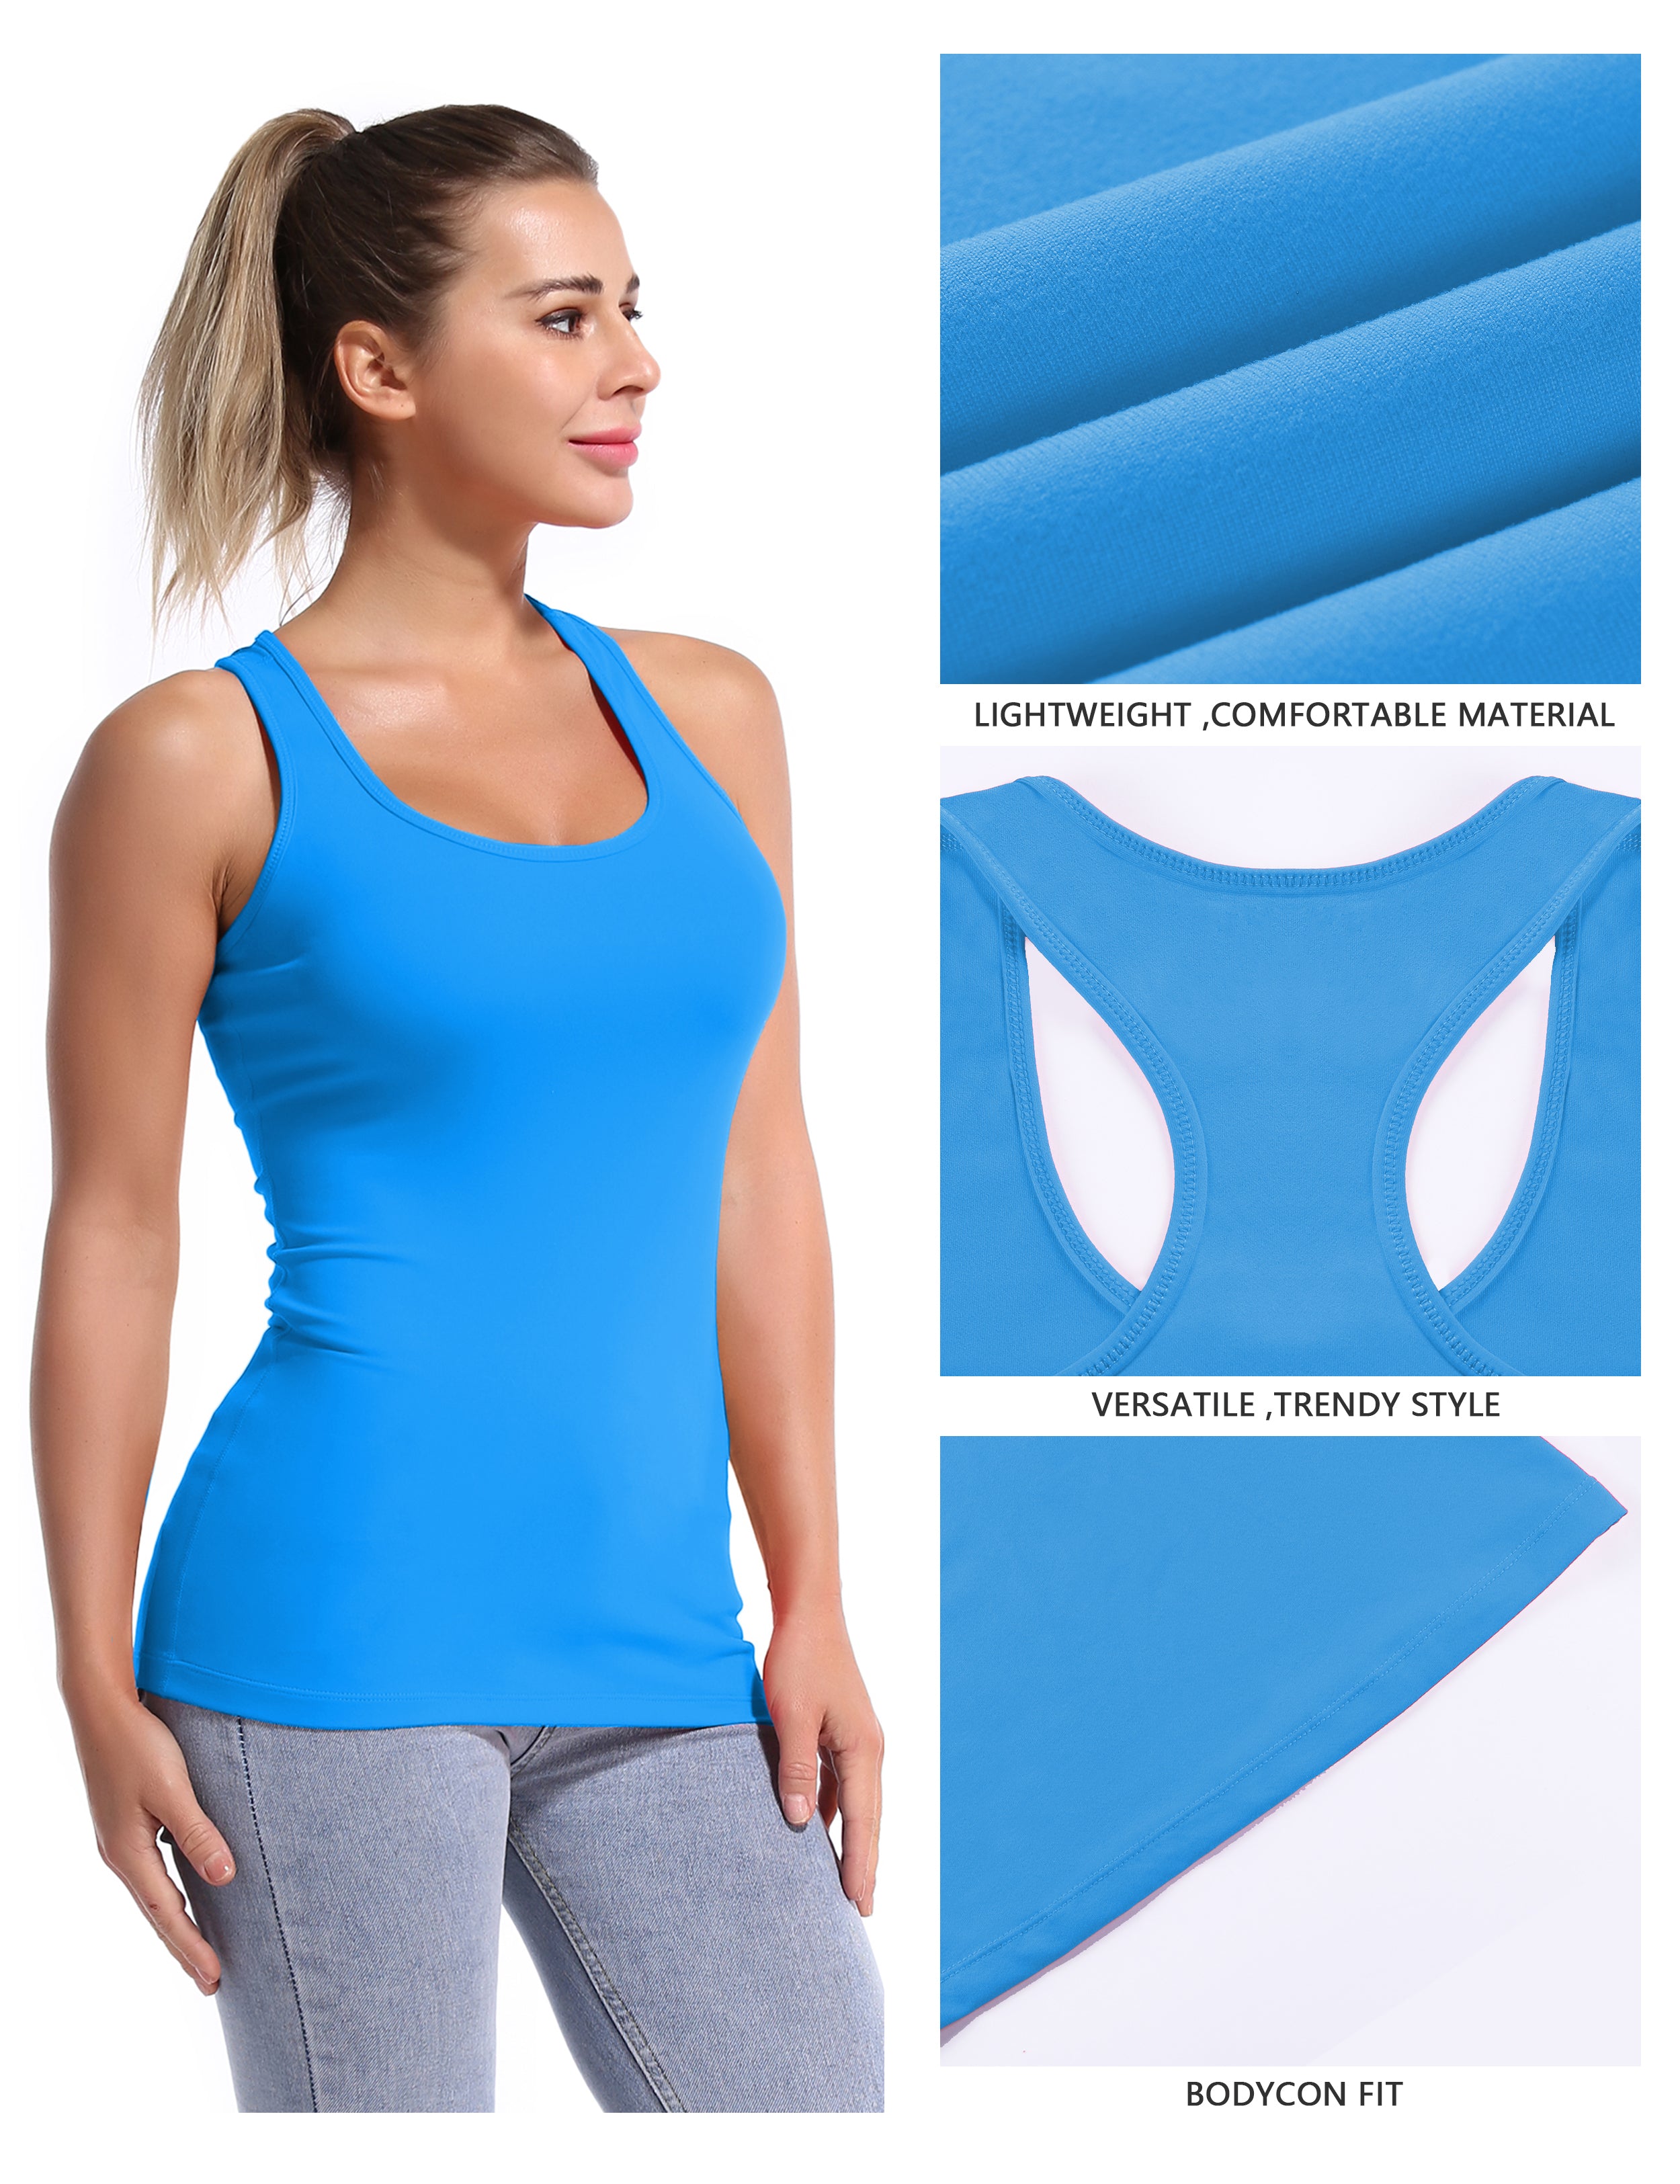 Racerback Athletic Tank Tops deepskyblue 92%Nylon/8%Spandex(Cotton Soft) Designed for Jogging Tight Fit So buttery soft, it feels weightless Sweat-wicking Four-way stretch Breathable Contours your body Sits below the waistband for moderate, everyday coverage